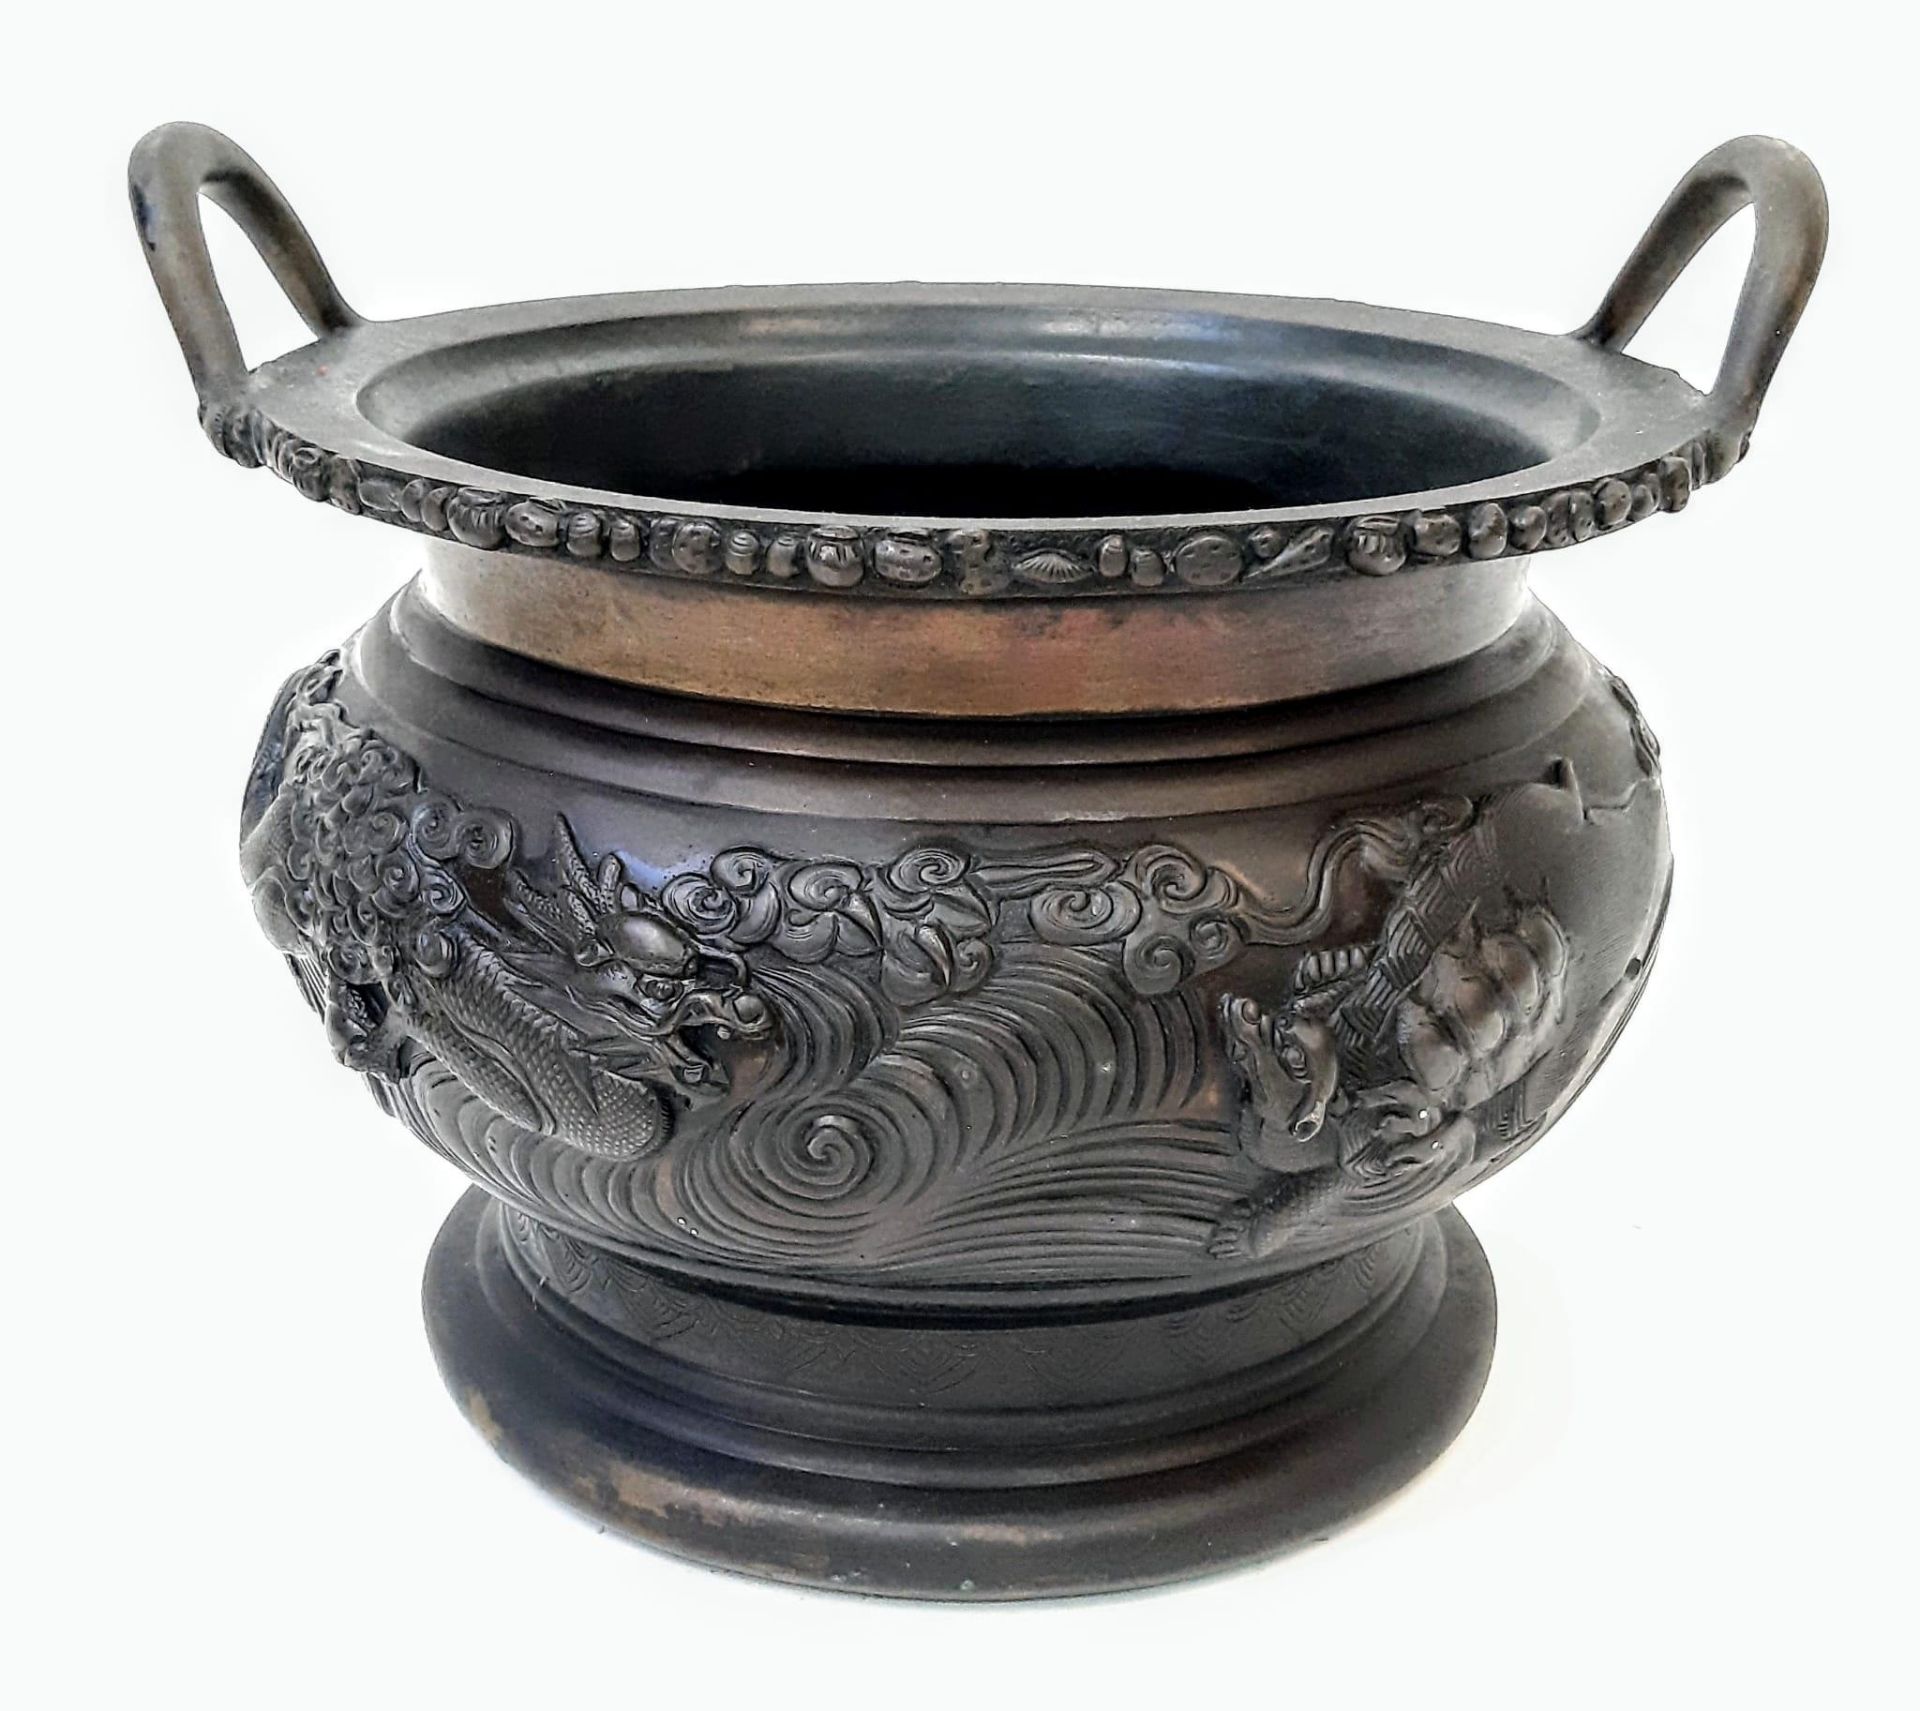 A superb, SIGNED, Antique Twin-Handled Chinese Bronze Censor. Large in proportions and fine in